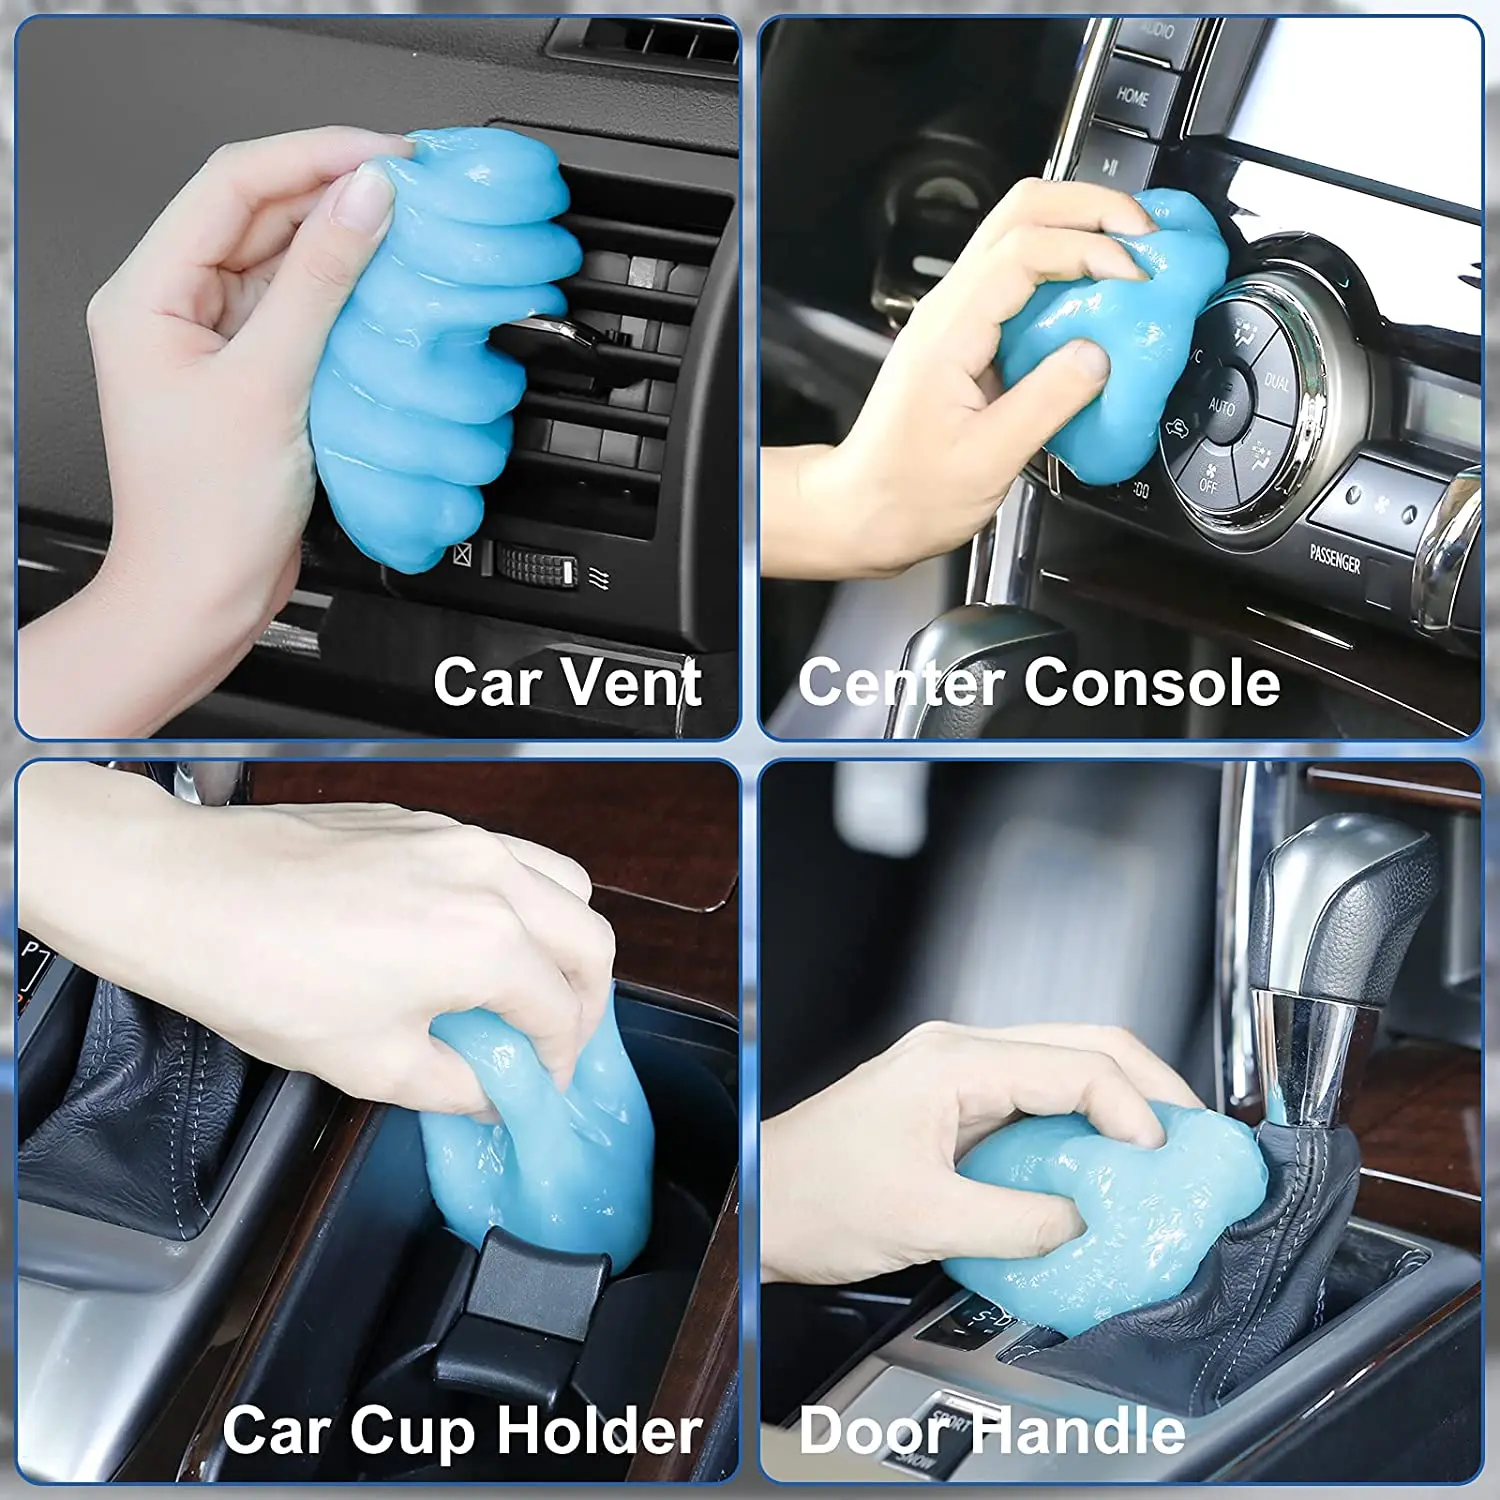 Cleaning Gel for Car, Car Cleaning Kit Universal Detailing